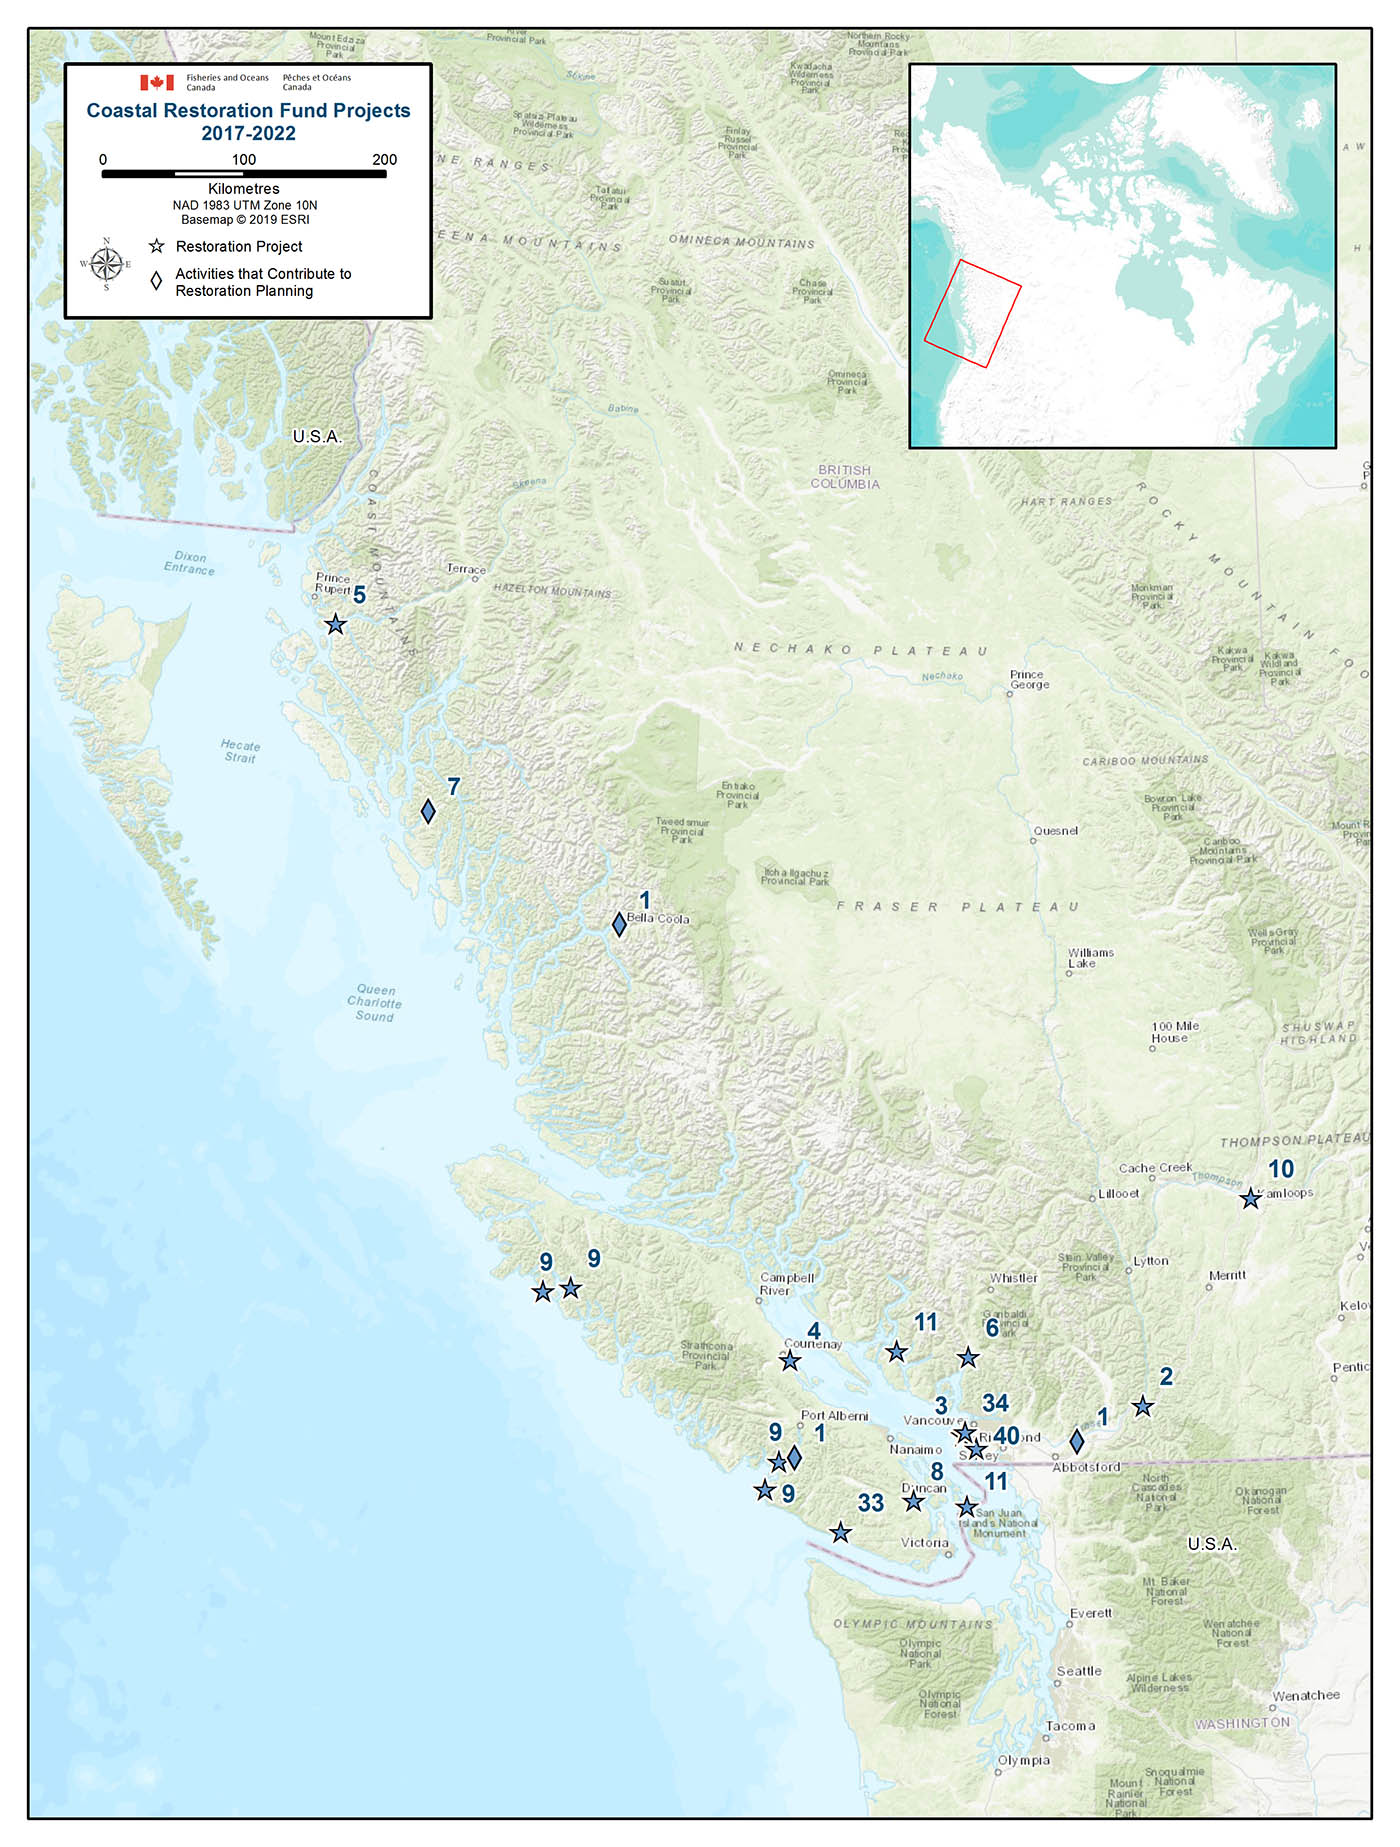 Map of the Pacific coast with projects identified.